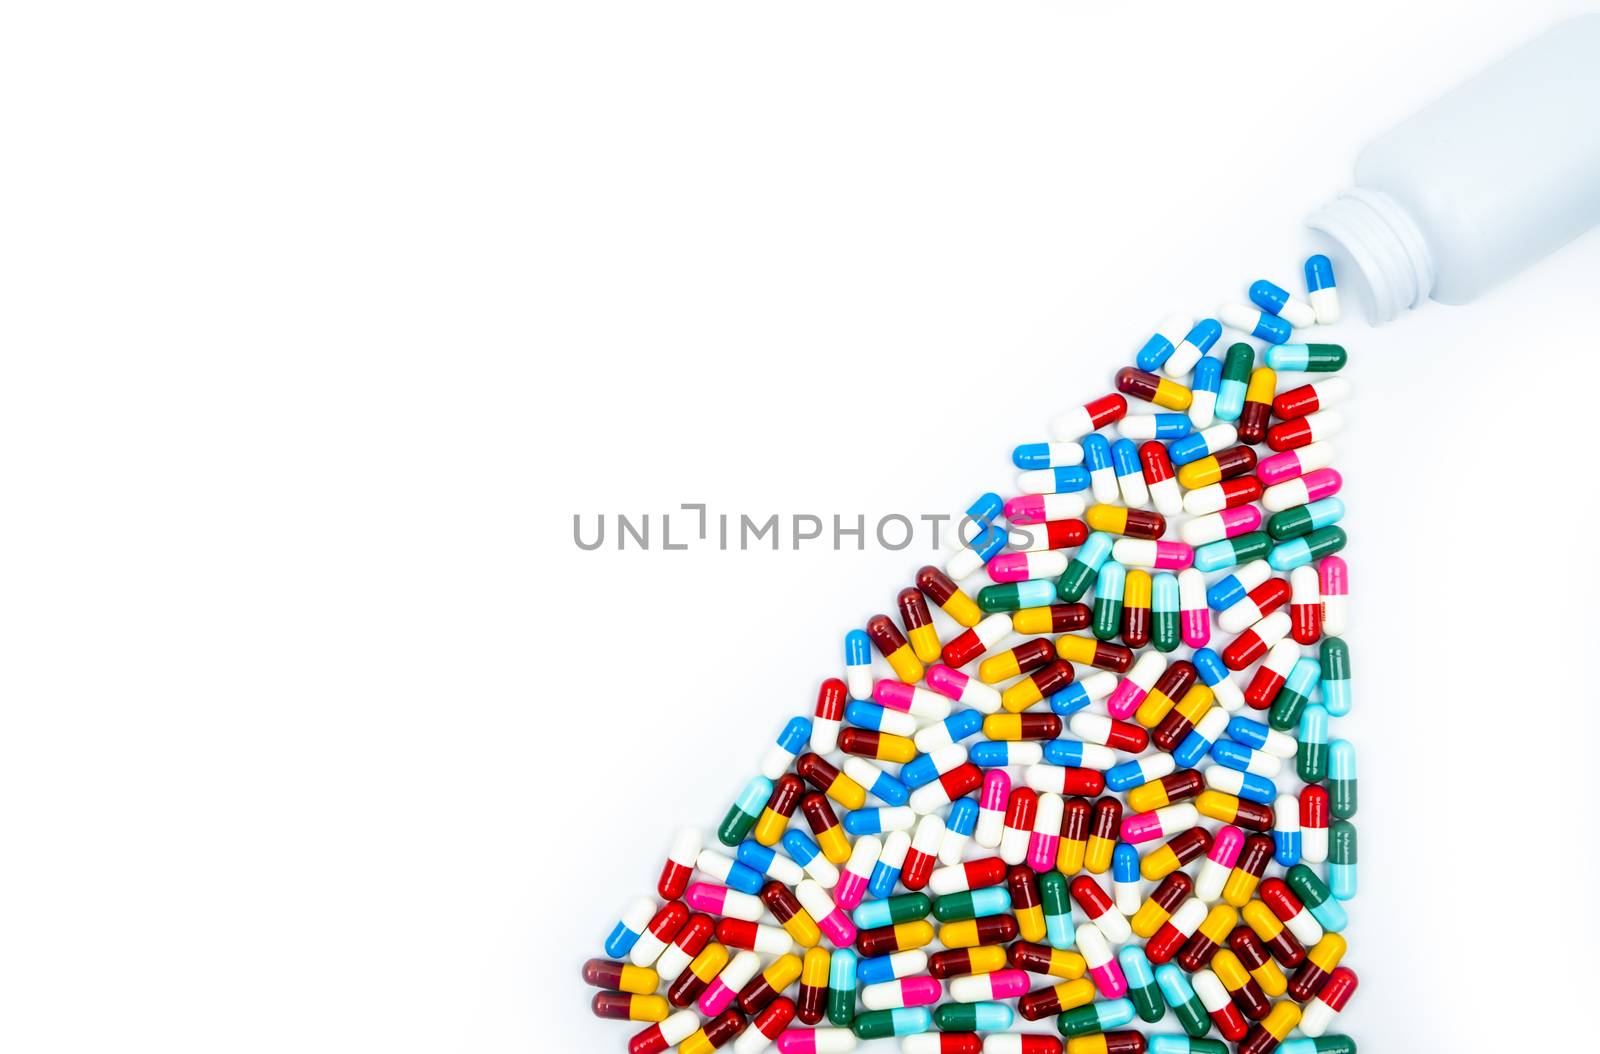 Antibiotic capsules spilling out of pill bottle on white background with copy space, just add your own text. Drug resistance concept. Antibiotics drug use with reasonable and global healthcare concept. Pharmaceutical industry. Pharmacy background.